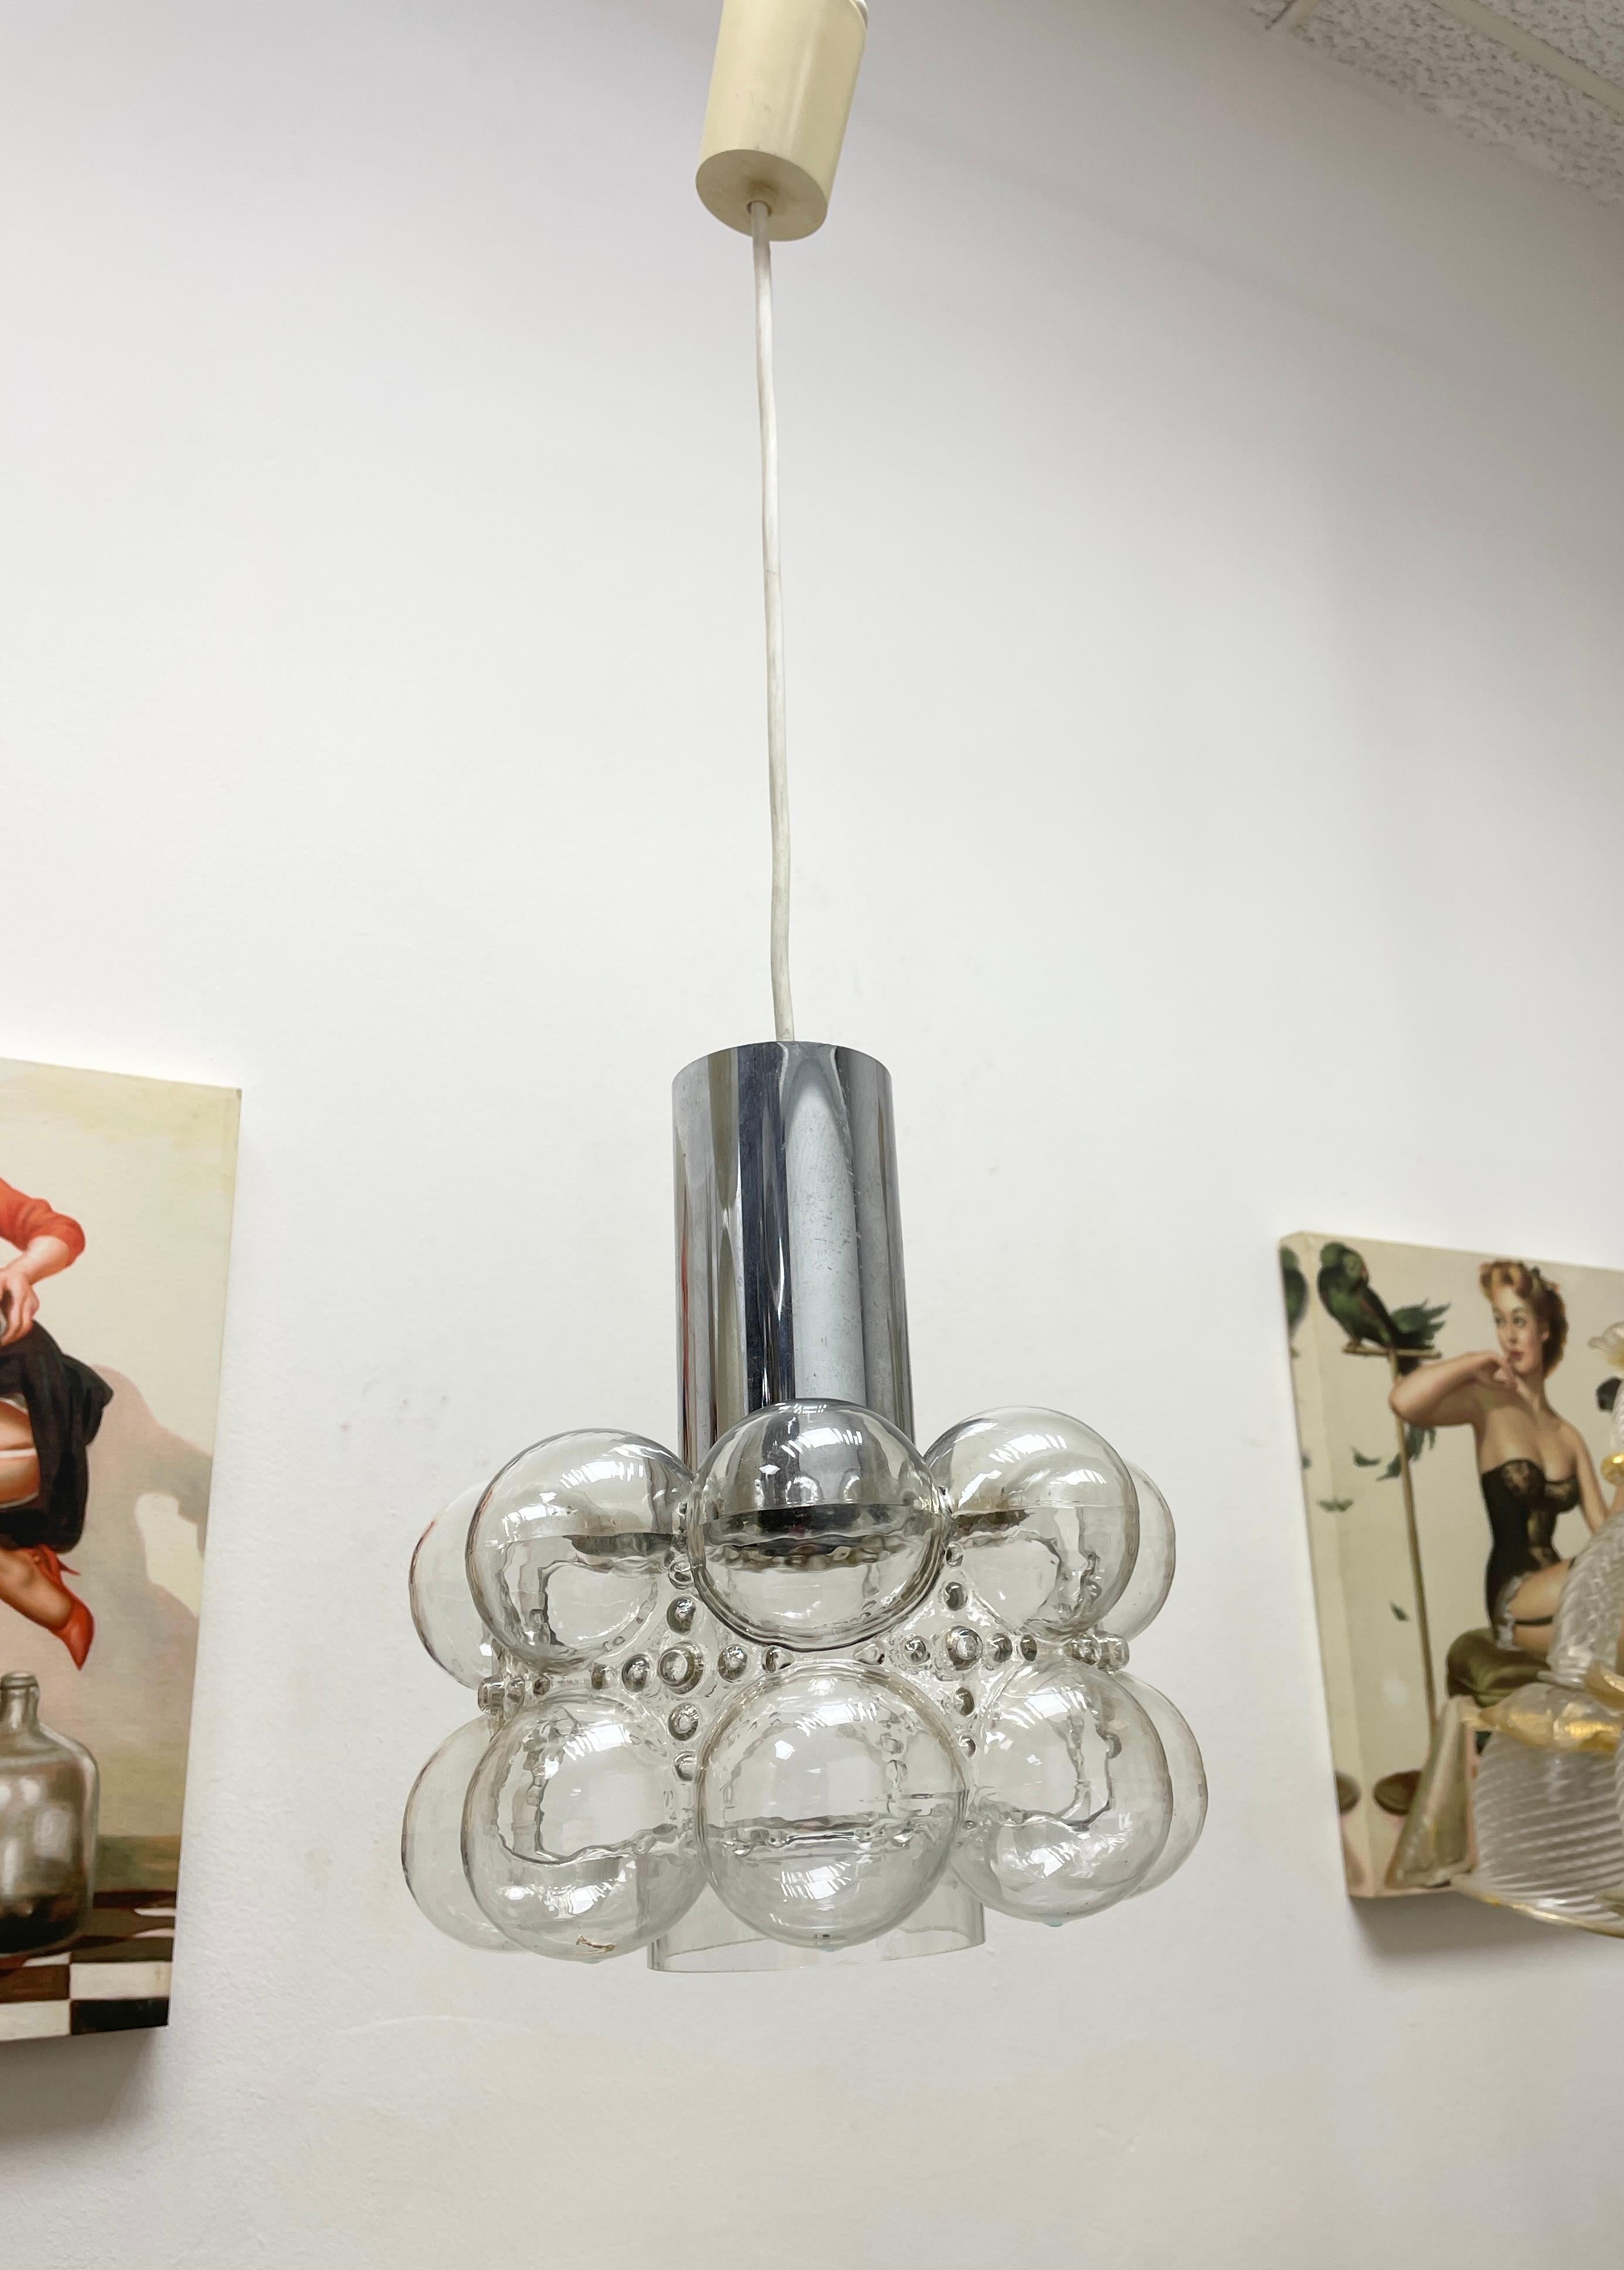 A petite bubble glass pendant designed by Helena Tynell for Glashütte Limburg, manufactured in Germany, circa 1970s. The Pendant requires one European E27 Edison bulb, up to 100 watts. A nice addition to any room. Found at an estate sale in